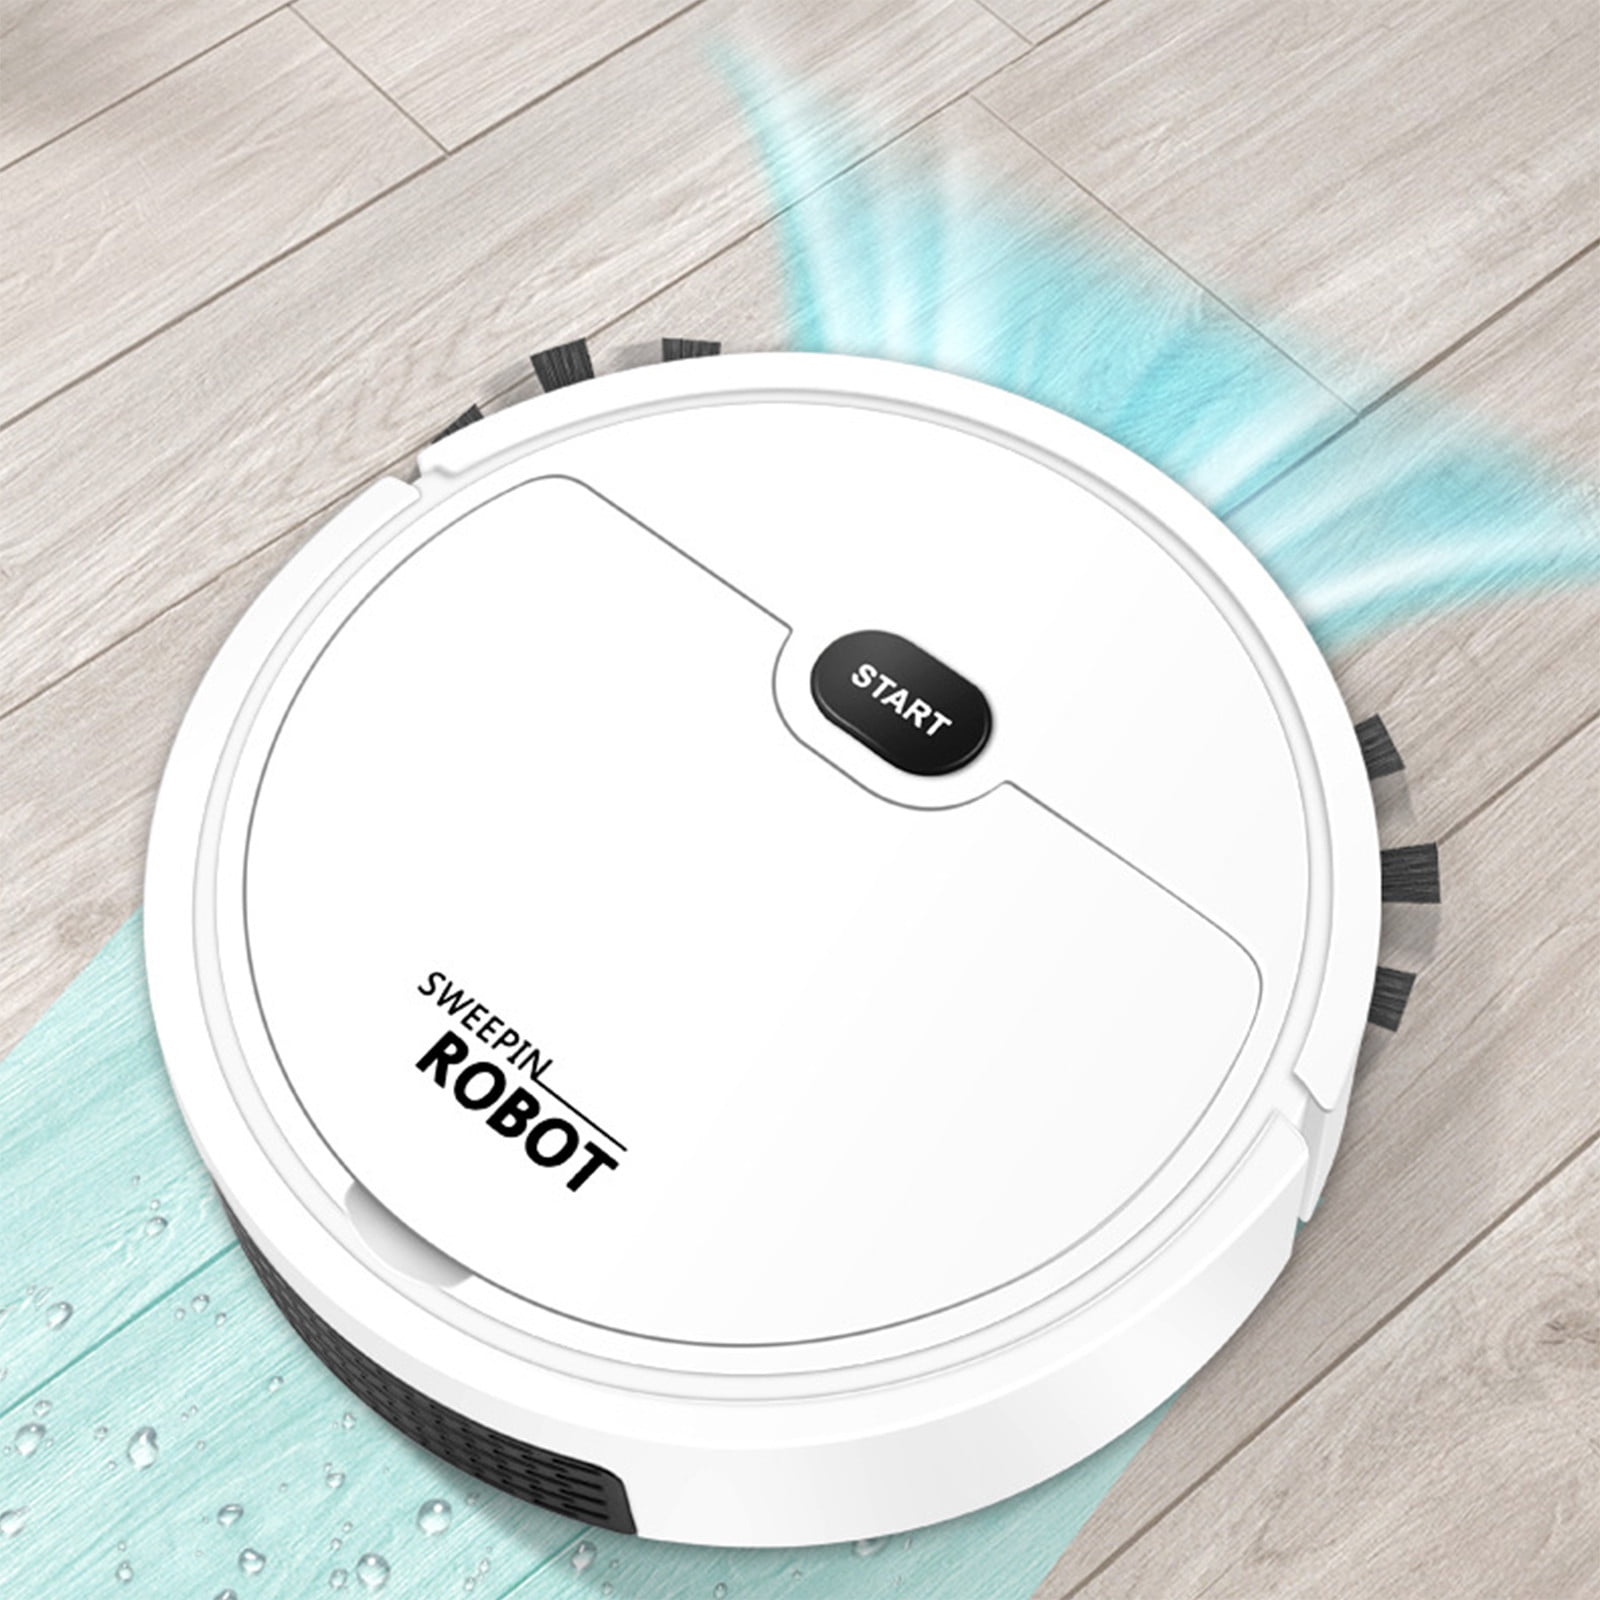  Birsppy Soule Robot Vacuum and Mop, Automatic Dirt Disposal,  Lidar Navigation, 3000Pa Suction Robotic Vacuum Cleaner with Mapping, 240  mins Runtime, Compatible with Alexa, Ideal for Pet Hair, Carpets